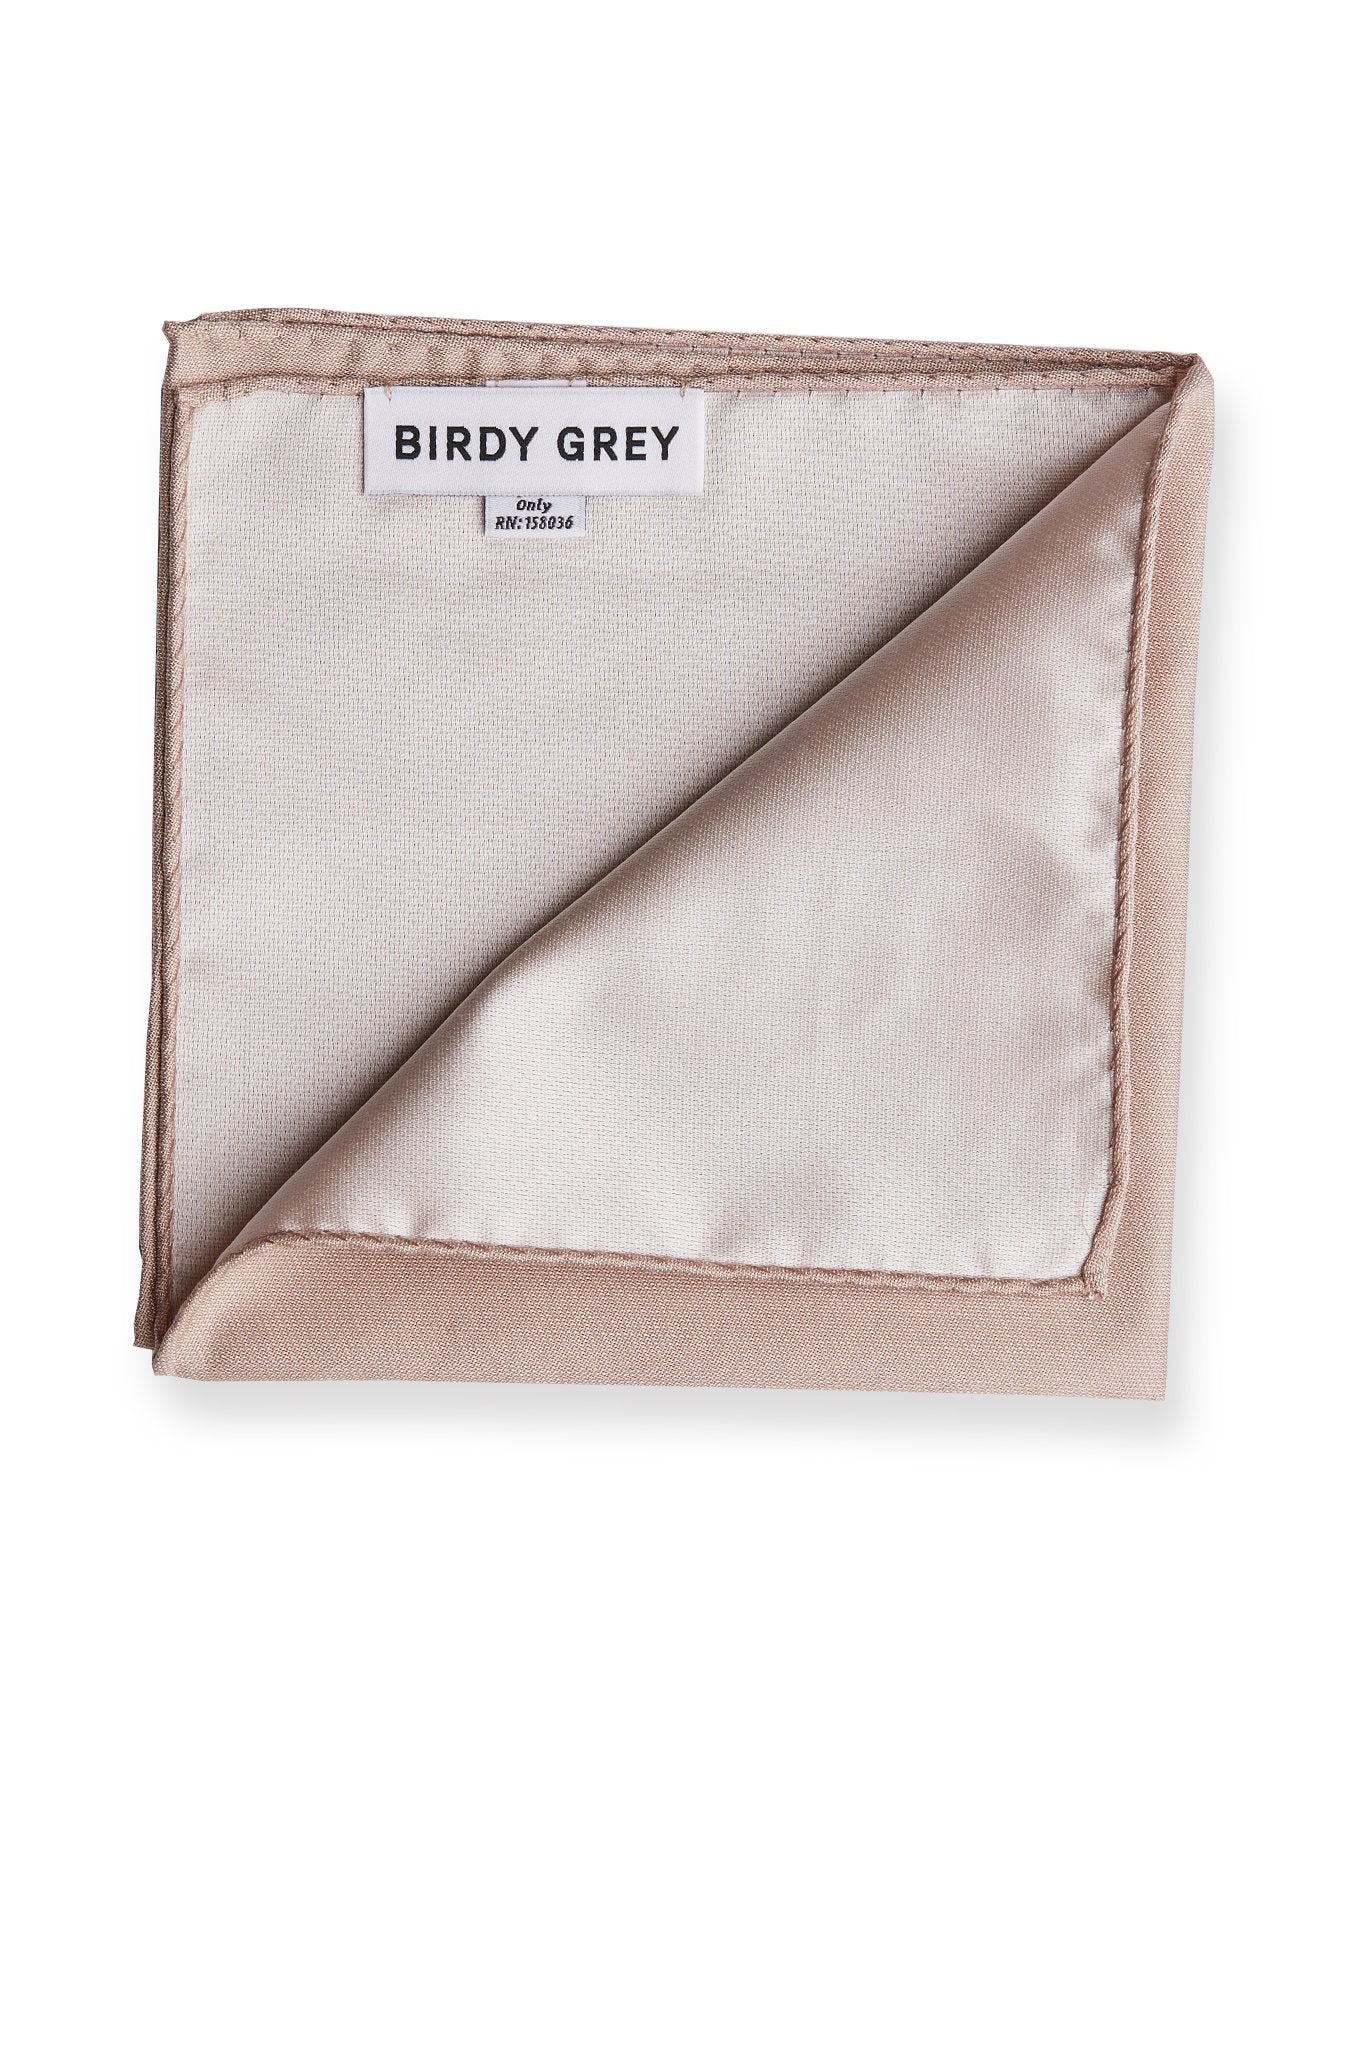 Didi Pocket Square in taupe by Birdy Grey, interior view